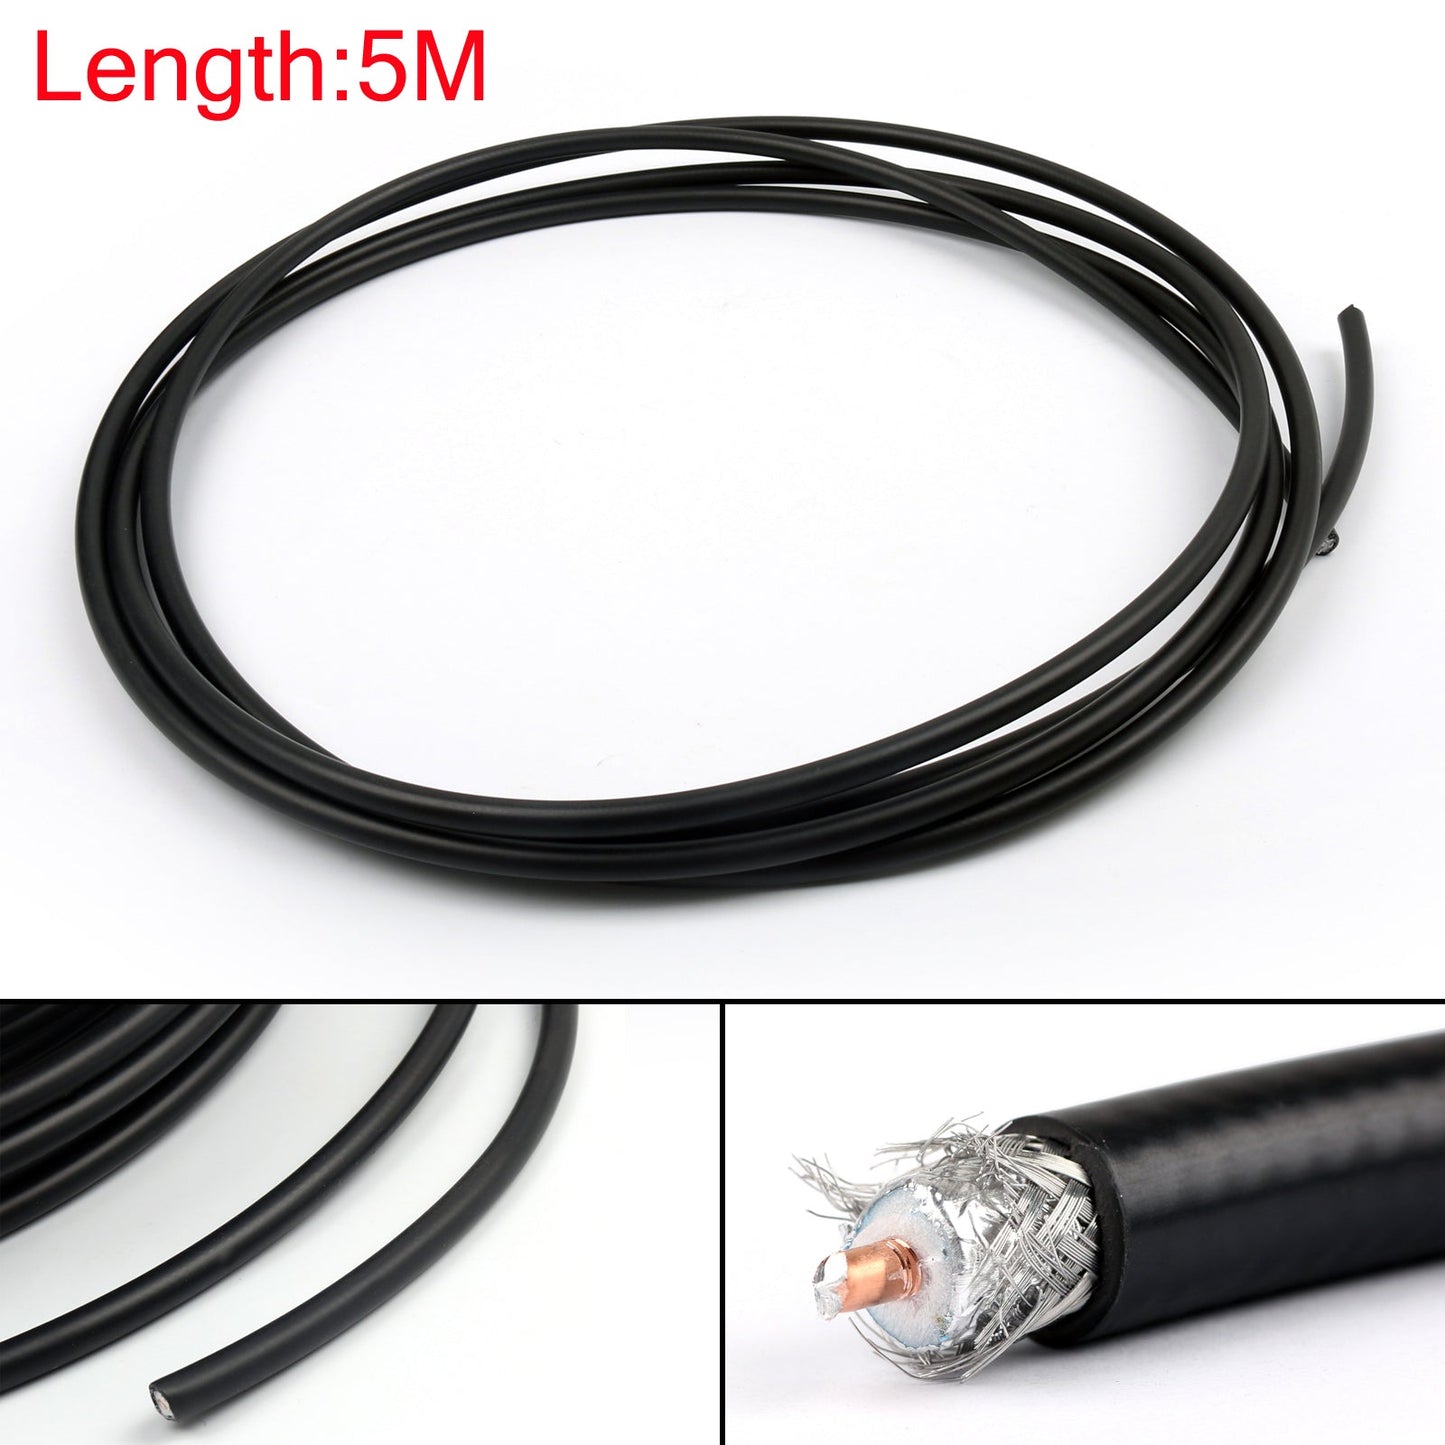 RG8/KSR400 RF Coaxial Cable Connector Coax shielded Pigtail